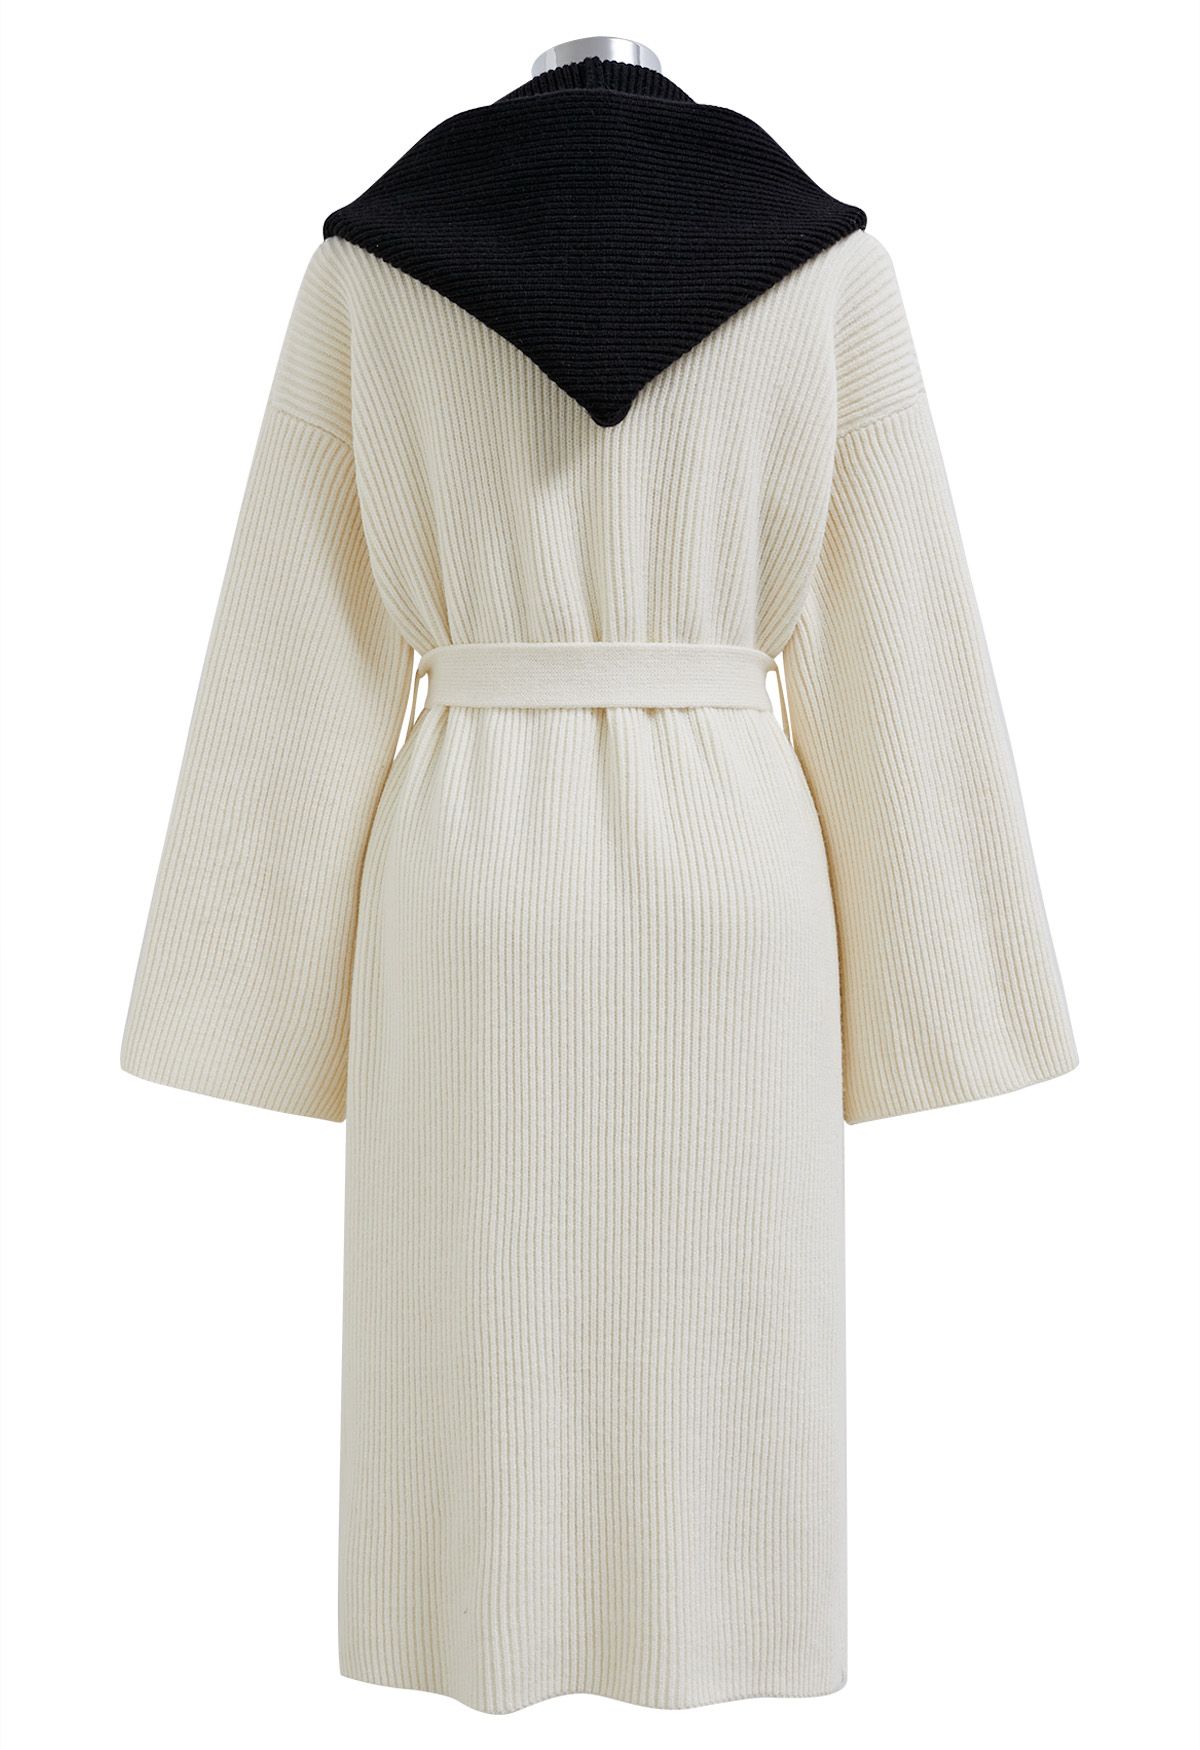 Contrast Fake Two-Piece Hooded Longline Coat in Cream